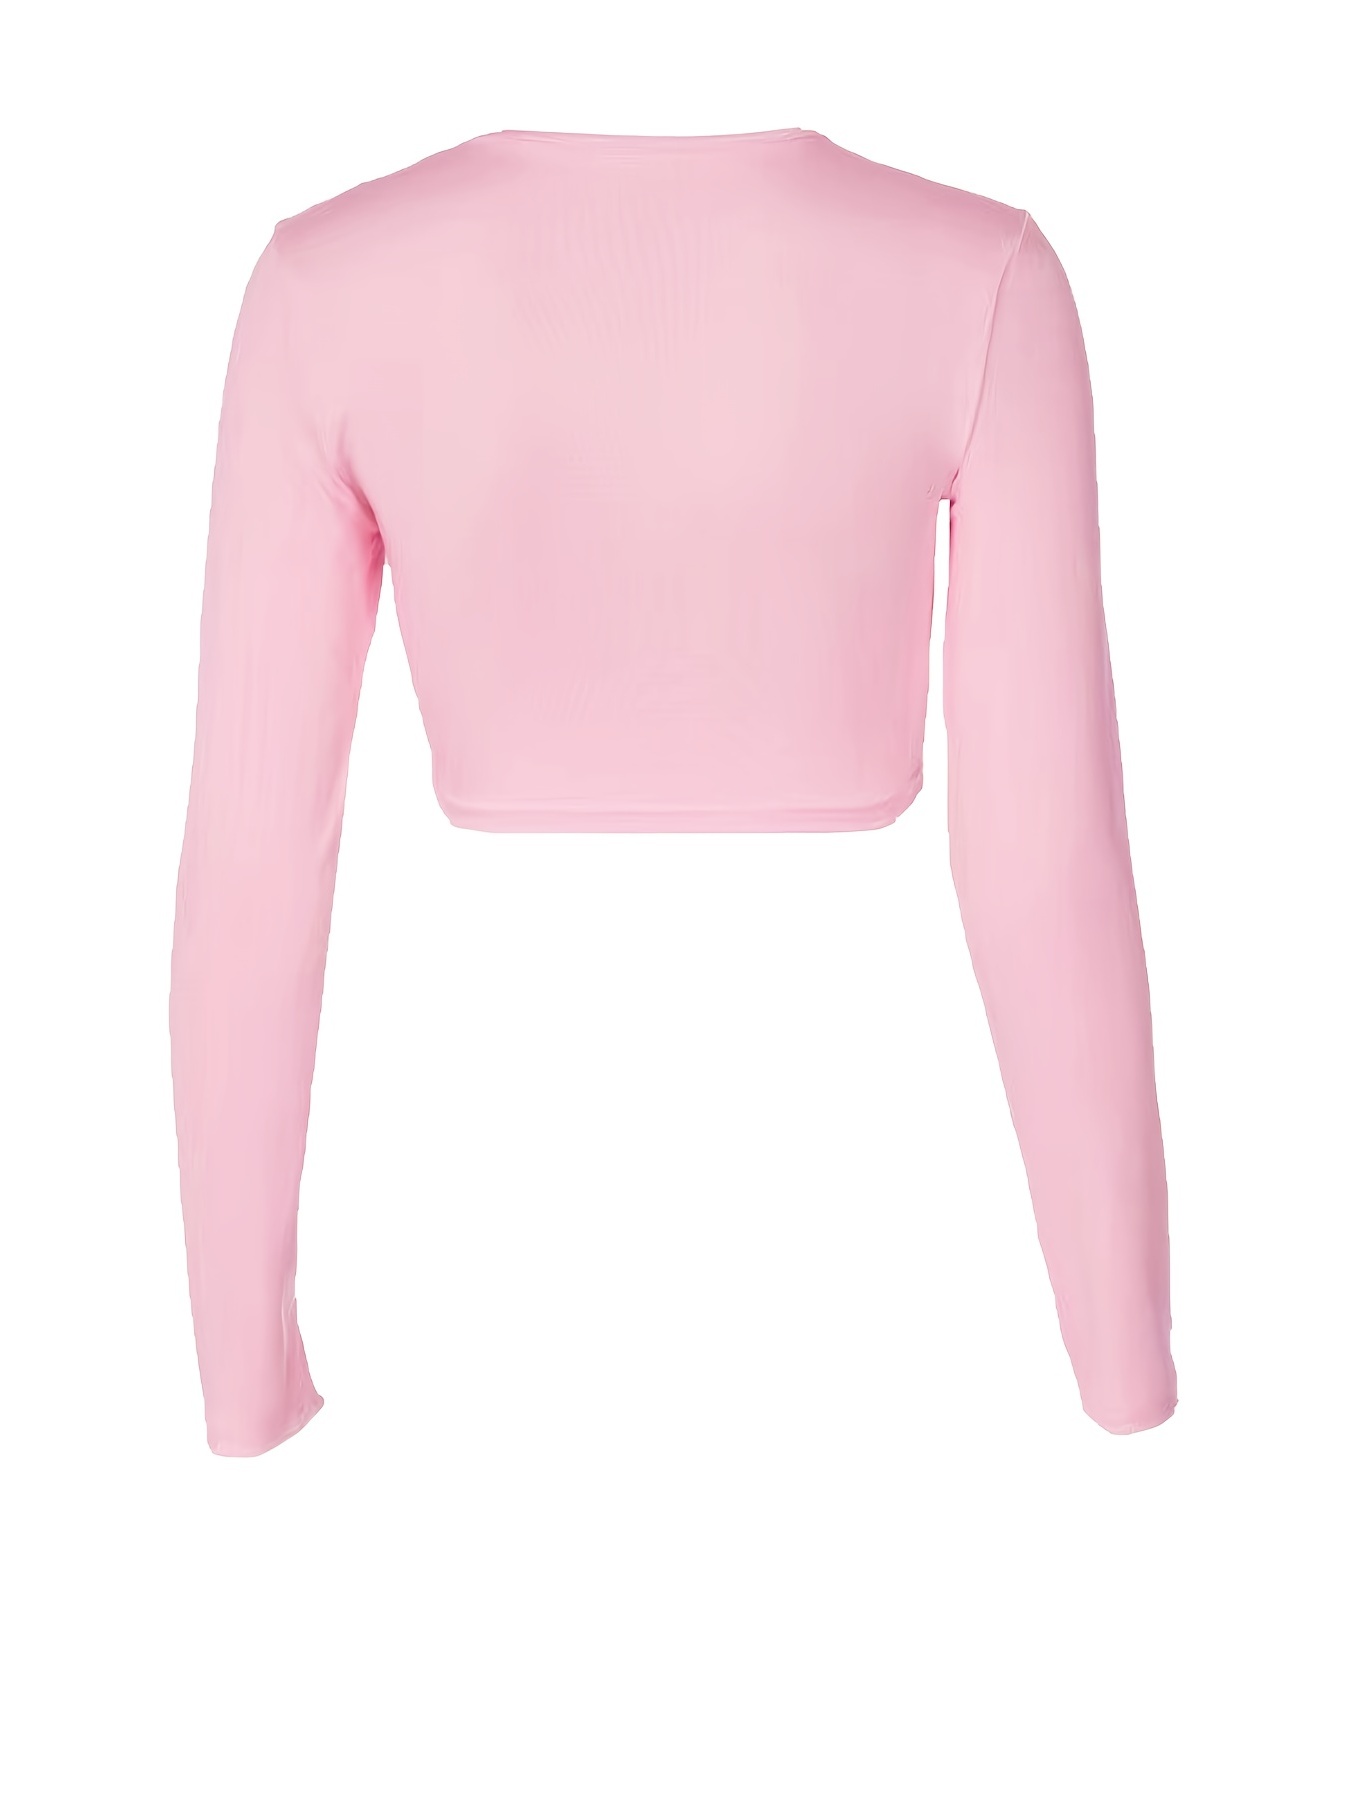 Plus White High Neck Soft Touch Long Sleeve Crop Top